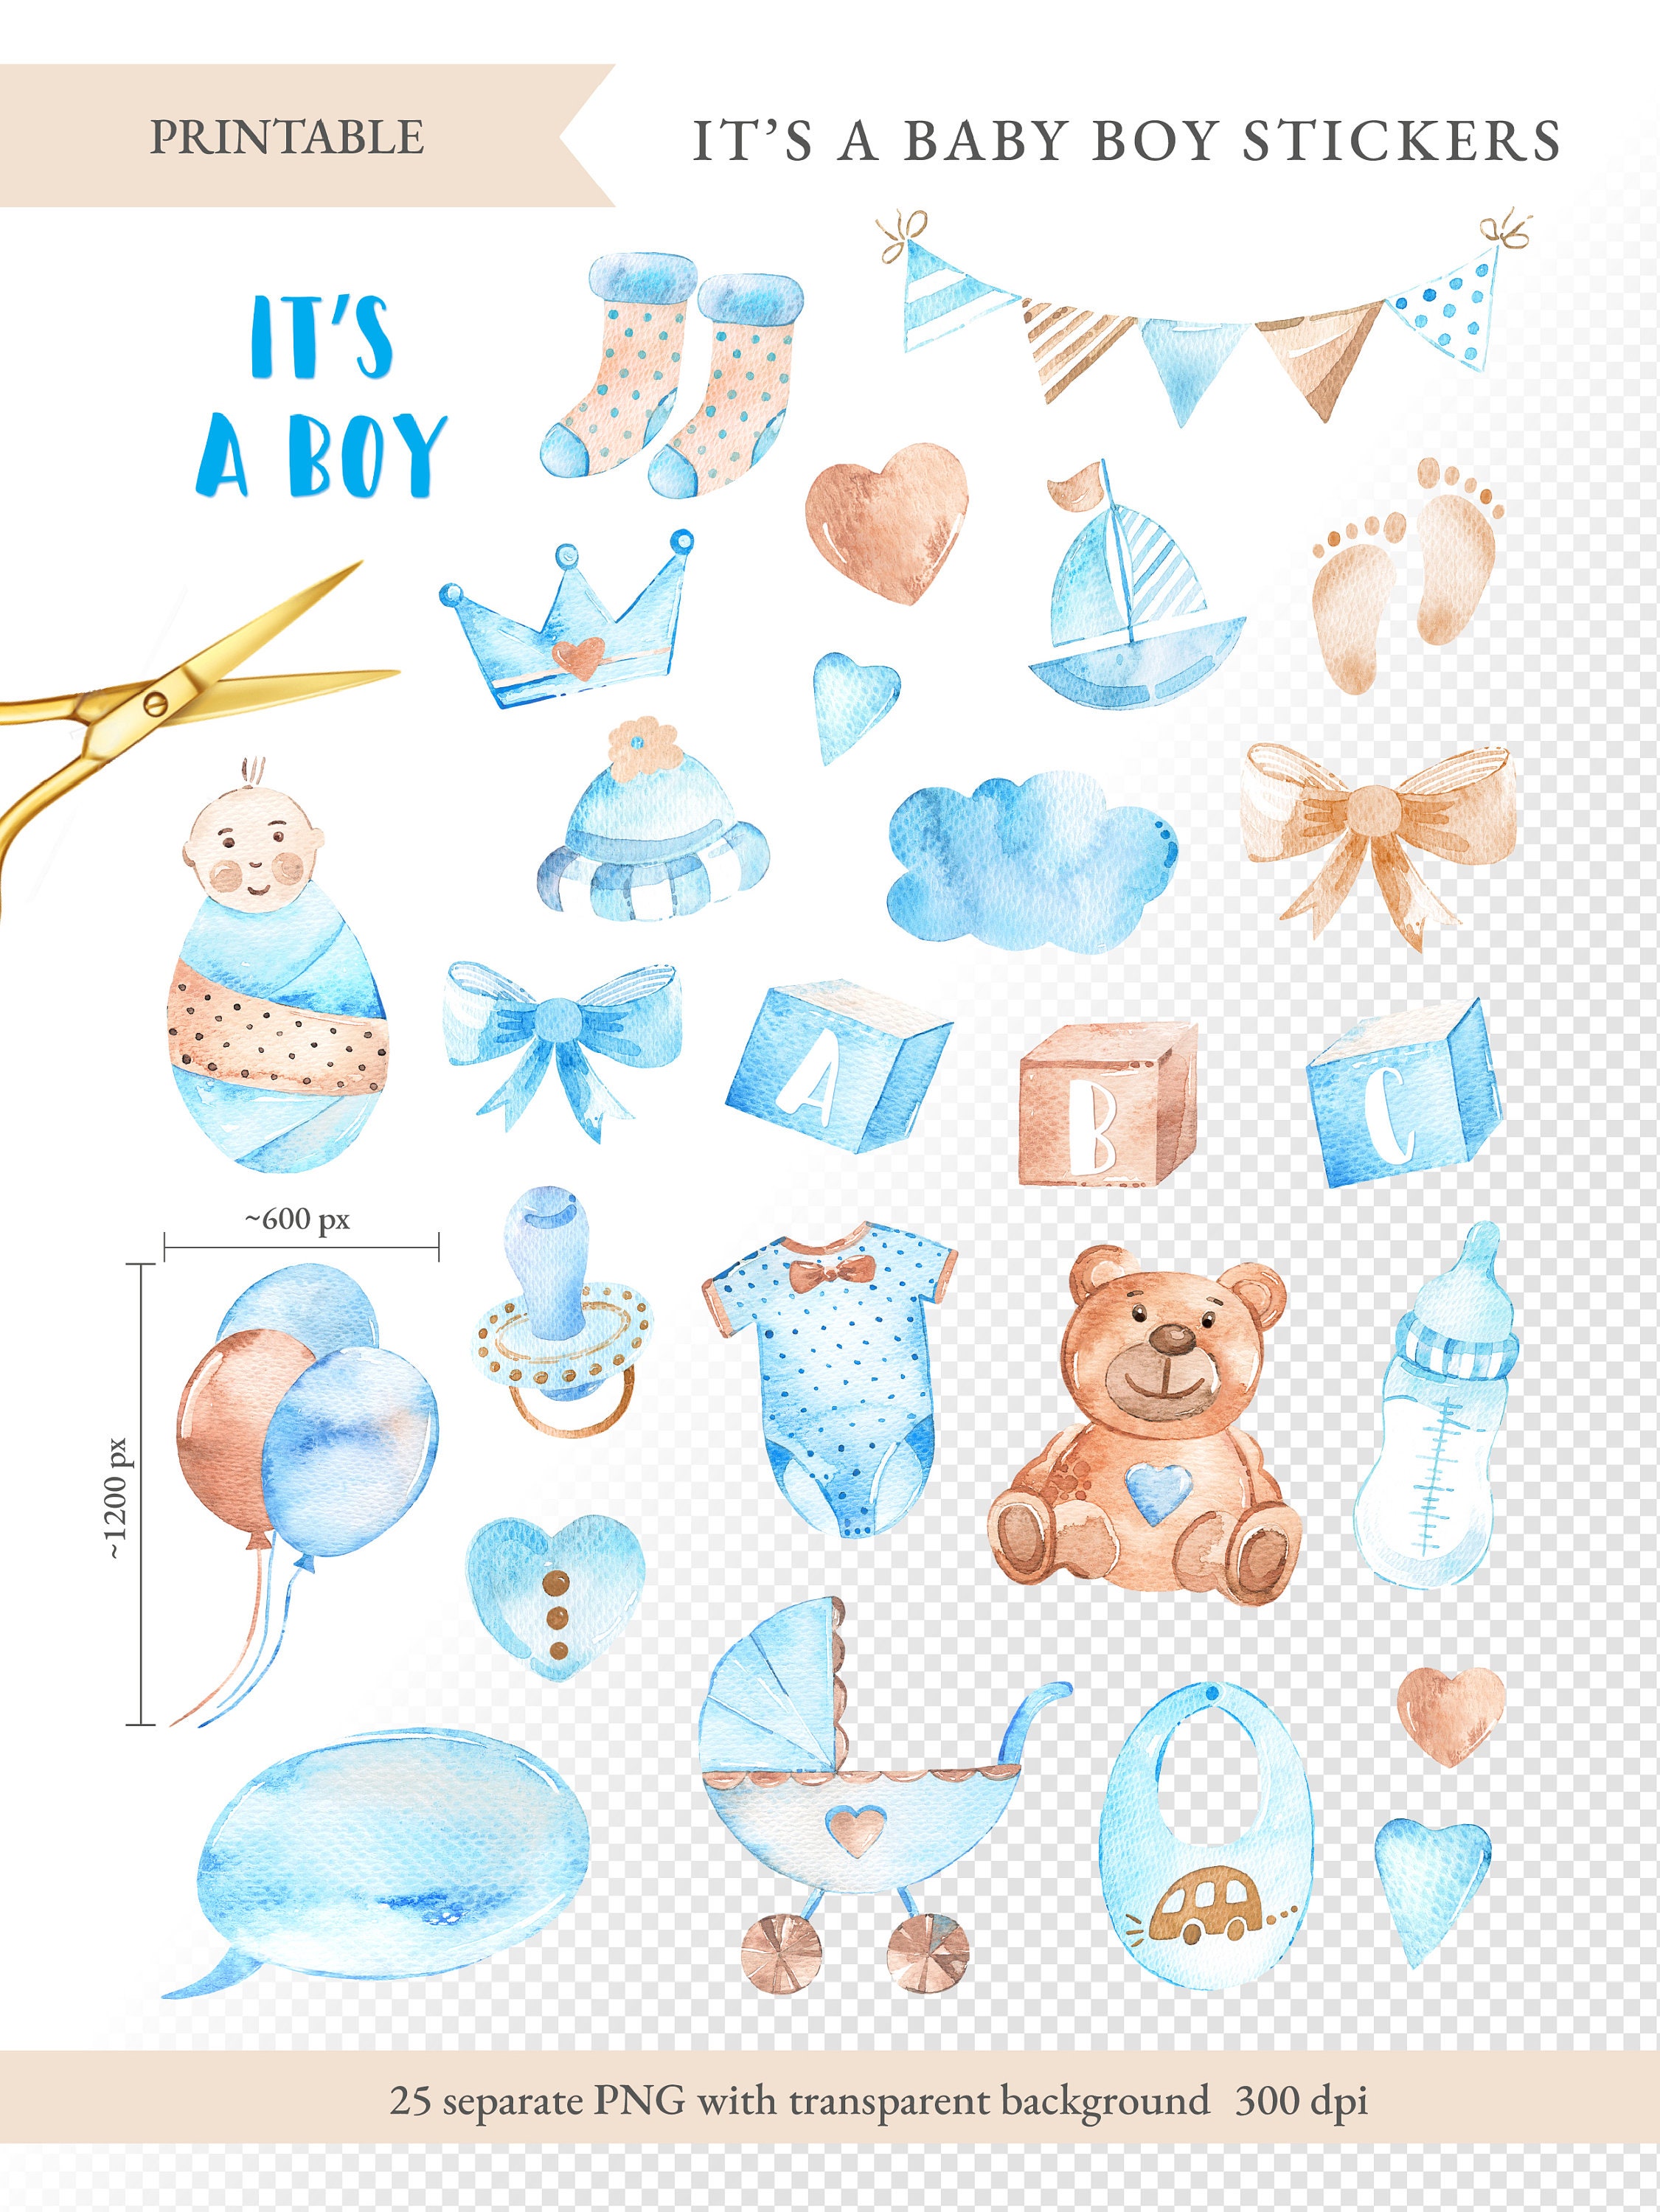 Baby Boy Stickers, New Baby Printable Bullet Journal Stickers, ITS A BOY  Png for Craft Projects, Scrapbooking 